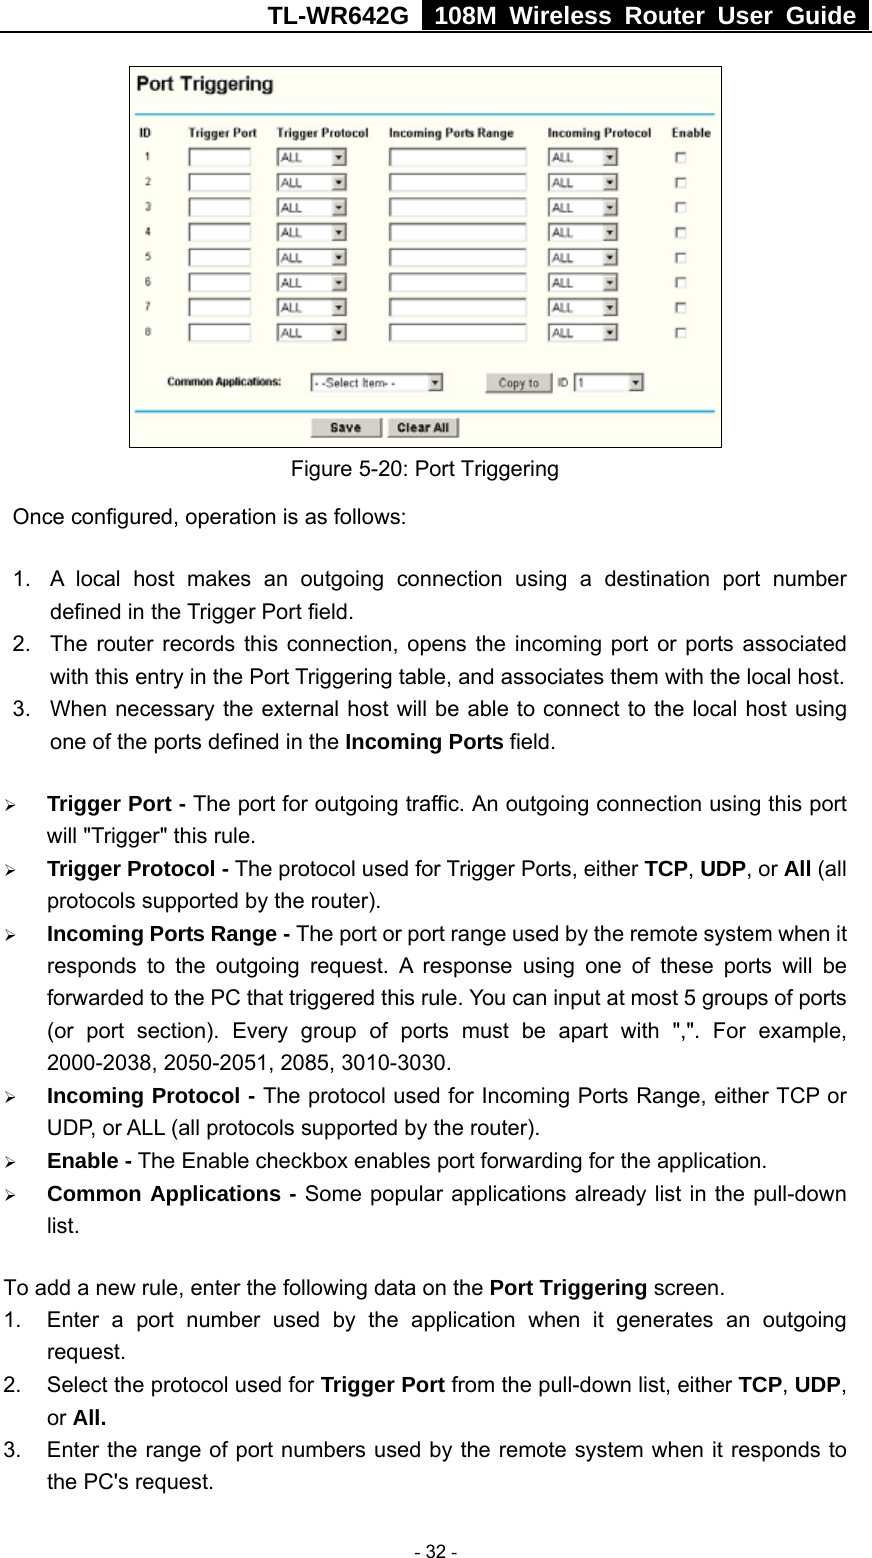 TL-WR642G   108M Wireless Router User Guide   - 32 -  Figure 5-20: Port Triggering Once configured, operation is as follows:   1.  A local host makes an outgoing connection using a destination port number defined in the Trigger Port field.   2.  The router records this connection, opens the incoming port or ports associated with this entry in the Port Triggering table, and associates them with the local host.   3.  When necessary the external host will be able to connect to the local host using one of the ports defined in the Incoming Ports field. ¾ Trigger Port - The port for outgoing traffic. An outgoing connection using this port will &quot;Trigger&quot; this rule. ¾ Trigger Protocol - The protocol used for Trigger Ports, either TCP, UDP, or All (all protocols supported by the router). ¾ Incoming Ports Range - The port or port range used by the remote system when it responds to the outgoing request. A response using one of these ports will be forwarded to the PC that triggered this rule. You can input at most 5 groups of ports (or port section). Every group of ports must be apart with &quot;,&quot;. For example, 2000-2038, 2050-2051, 2085, 3010-3030. ¾ Incoming Protocol - The protocol used for Incoming Ports Range, either TCP or UDP, or ALL (all protocols supported by the router). ¾ Enable - The Enable checkbox enables port forwarding for the application. ¾ Common Applications - Some popular applications already list in the pull-down list. To add a new rule, enter the following data on the Port Triggering screen.   1.  Enter a port number used by the application when it generates an outgoing request.   2.  Select the protocol used for Trigger Port from the pull-down list, either TCP, UDP, or All. 3.  Enter the range of port numbers used by the remote system when it responds to the PC&apos;s request. 